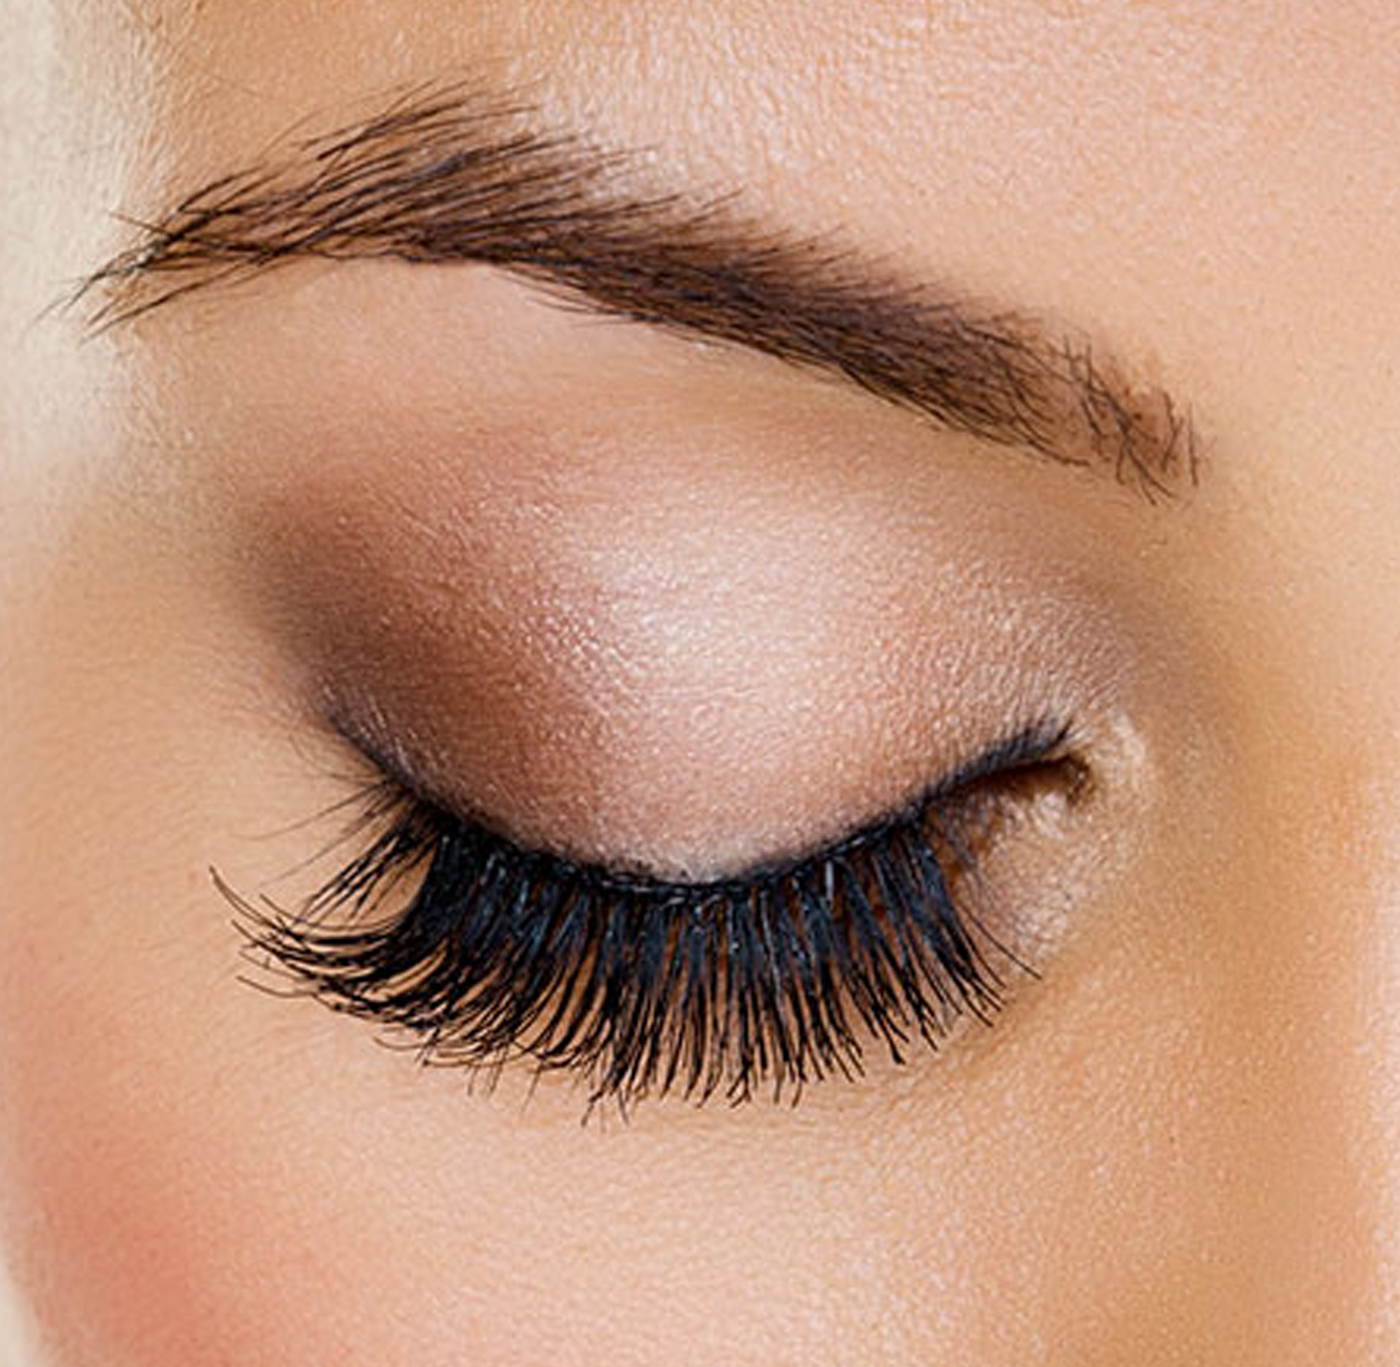 Eyelash Extensions Tags'massages spa near me; spas in near me; facials spas near me; spa and massages near me; day at the spa near me; spas near me for couples; best facials near me; massage and facial packages near me; best spa massages near me; massage and facials near me; couples day spa packages near me; skin facials near me; couples spa treatments near me; full body massage and facial near me; luxury day spa near me; facial therapist near me; pregnancy facials near me; good facials near me; day spa near me for couples; couples facial treatment near me; best spa treatment near me; massage and spa places near me; spas with massage near me; massage spa places near me; body facials near me; best spa and massages near me; facial spa treatment near me; upscale massage spa near me; spa for massage near me; spa for facial near me; facials and spa near me; massage day spa near me; day spa near me massage; best spa for facial near me; therapeutic spas near me; day spa and massage near me; spa massage and facial near me; spas treatments near me; salon spas near me; relaxation spa near me; full day spa package near me; couples day spa near me; salon facial near me; body massages spa near me; best place for facials near me; day spa packages near memassages spa near me; spas in near me; facials spas near me; spa and massages near me; day at the spa near me; spas near me for couples; best facials near me; massage and facial packages near me; best spa massages near me; massage and facials near me; couples day spa packages near me; skin facials near me; couples spa treatments near me; full body massage and facial near me; luxury day spa near me; facial therapist near me; pregnancy facials near me; good facials near me; day spa near me for couples; couples facial treatment near me; best spa treatment near me; massage and spa places near me; spas with massage near me; massage spa places near me; body facials near me; best spa and massages near me; facial spa treatment near me; upscale massage spa near me; spa for massage near me; spa for facial near me; facials and spa near me; massage day spa near me; day spa near me massage; best spa for facial near me; therapeutic spas near me; day spa and massage near me; spa massage and facial near me; spas treatments near me; salon spas near me; relaxation spa near me; full day spa package near me; couples day spa near me; salon facial near me; body massages spa near me; best place for facials near me; day spa packages near me Skincare Science; Spa Treatments; Spa Makeover;, body products; medspa; anti-aging; anti-aging injections; derma fillers; hydroglo; healite; aesthetics treatments; facial cosmetics; massages spa near me, spas in near me, facials spas near me, spa and massages near me, day at the spa near me, spas near me for couples, best facials near me, massage and facial packages near me, best spa massages near me, massage and facials near me, couples day spa packages near me, skin facials near me, couples spa treatments near me, full body massage and facial near me, luxury day spa near me, facial therapist near me, pregnancy facials near me, good facials near me, day spa near me for couples, couples facial treatment near me, best spa treatment near me, massage and spa places near me, spas with massage near me, massage spa places near me, body facials near me, best spa and massages near me, facial spa treatment near me, upscale massage spa near me, spa for massage near me, spa for facial near me, facials and spa near me, massage day spa near me, day spa near me massage, best spa for facial near me, therapeutic spas near me, day spa and massage near me, spa massage and facial near me, spas treatments near me, salon spas near me, relaxation spa near me, full day spa package near me, couples day spa near me, salon facial near me, body massages spa near me, best place for facials near me, day spa packages near me Skincare Science, Spa Treatments, Spa Makeover, body products, medspa, anti-aging, anti-aging injections, derma fillers, hydroglo, healite, facial cosmetics, aesthetics treatments